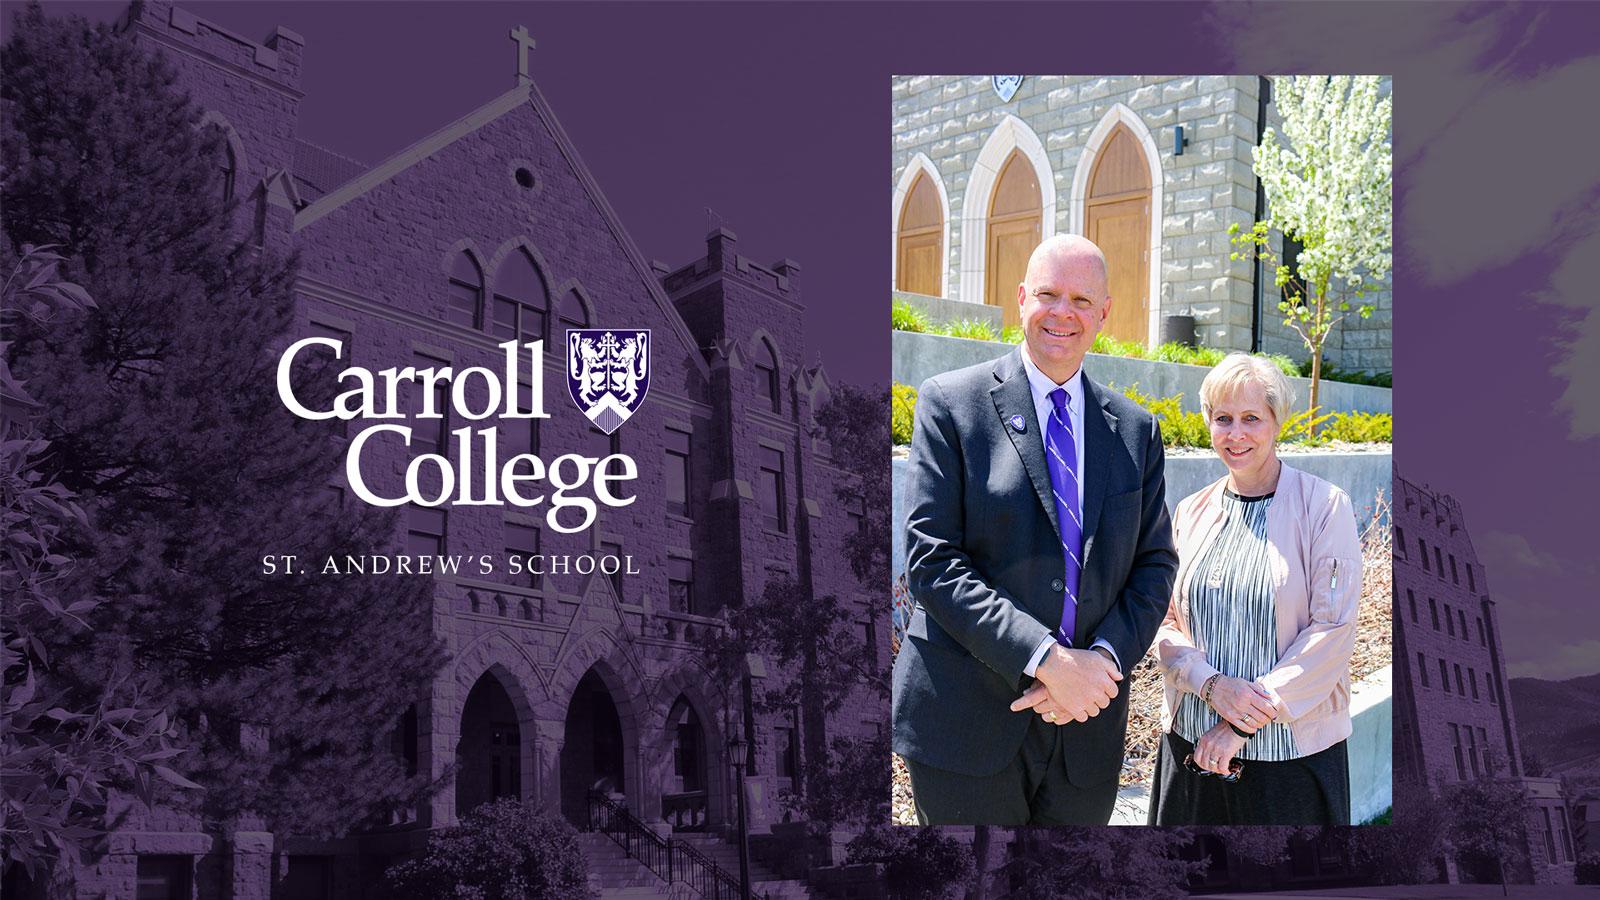 Carroll College President John Cech and St. Andrew Principal GG Grotbo